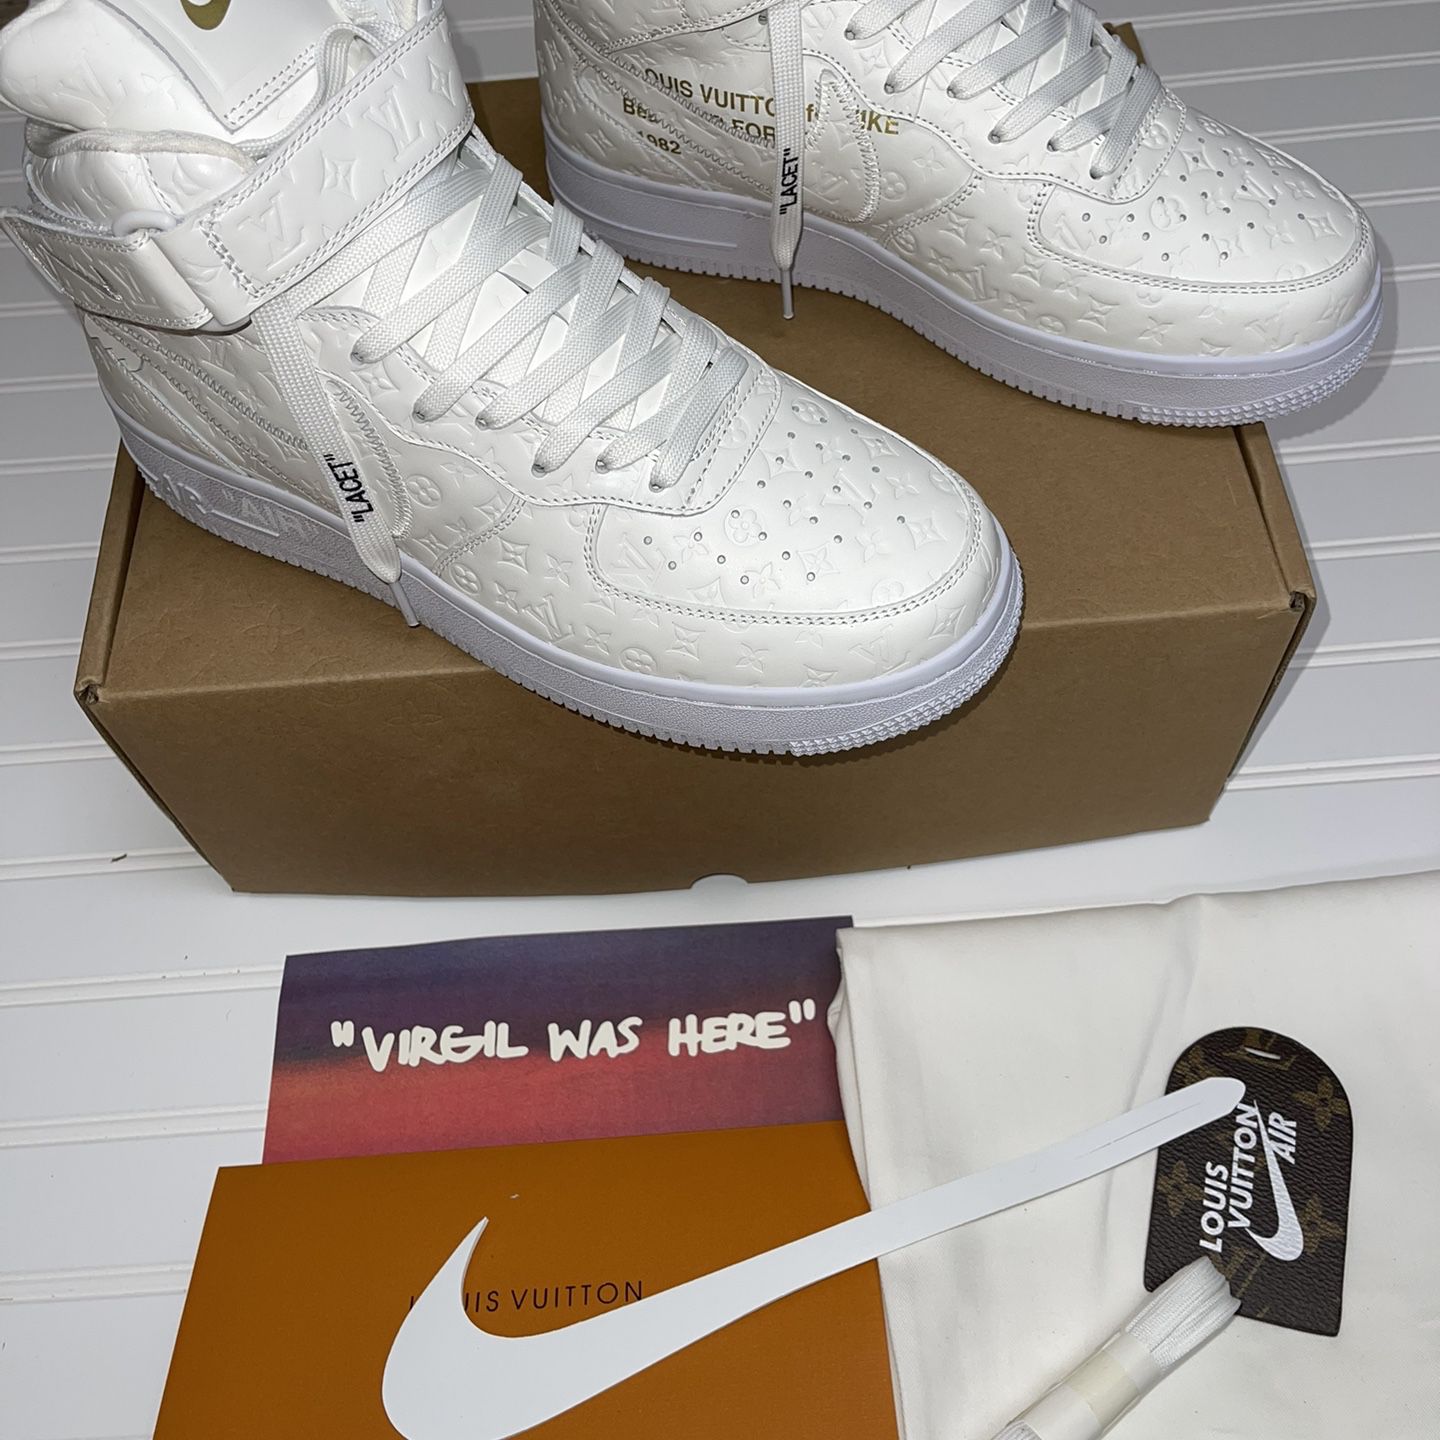 LOUIS VUITTON X NIKE AIRFORCE 1 MID “TRIPLE WHITE” for Sale in Fort  Lauderdale, FL - OfferUp